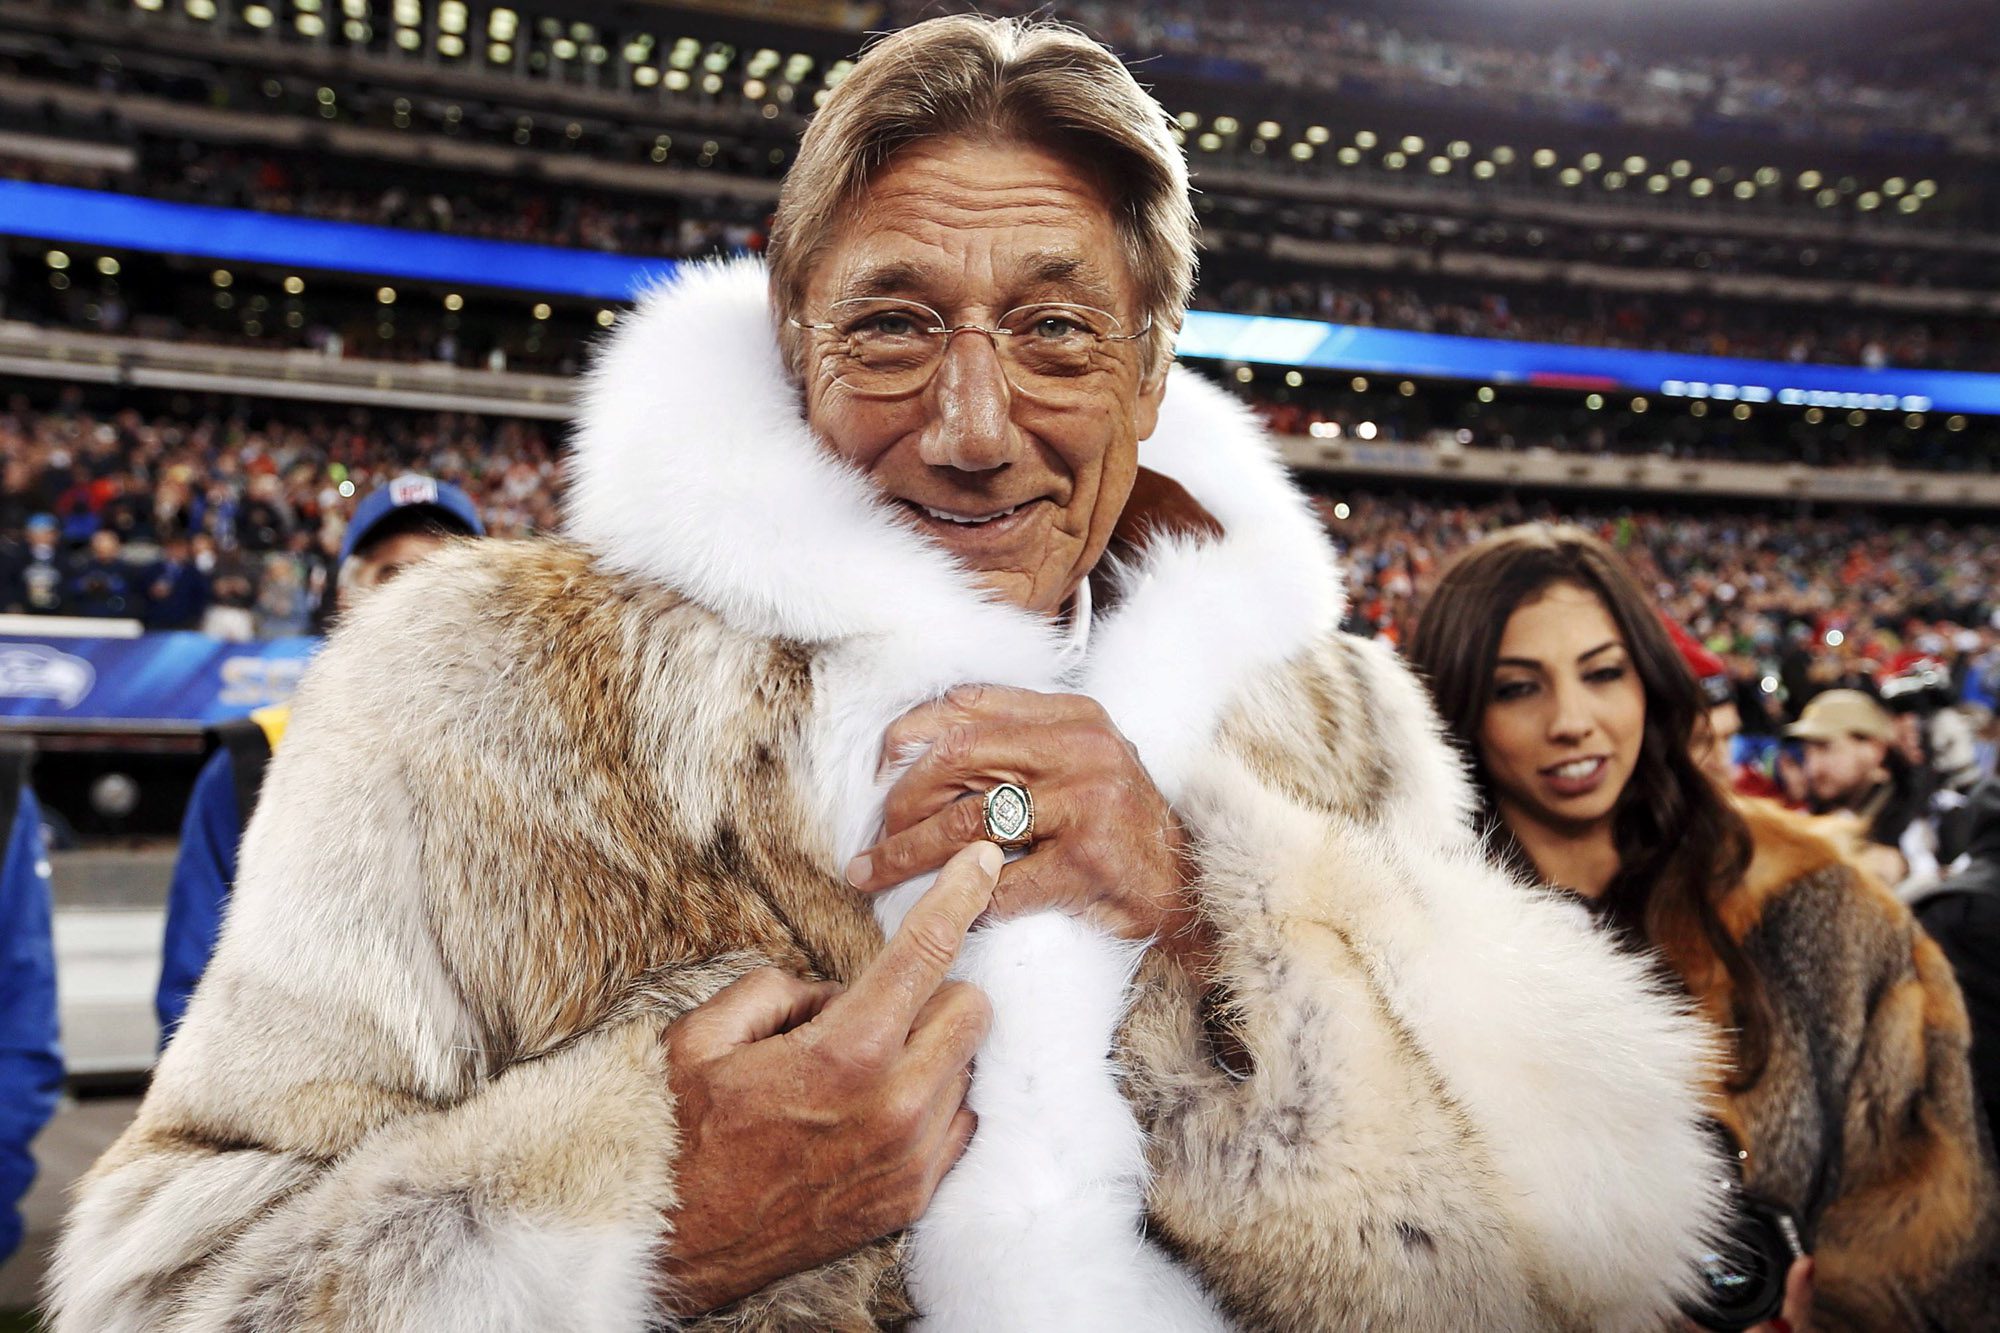 Former New York Jets quarterback Joe Namath points to his championship ring before the Seattle Seahawks play the Denver Broncos in the NFL Super Bowl XLVIII football game in East Rutherford, New Jersey, February 2, 2014. REUTERS/Carlo Allegri (UNITED STATES - Tags: SPORT FOOTBALL TPX IMAGES OF THE DAY)